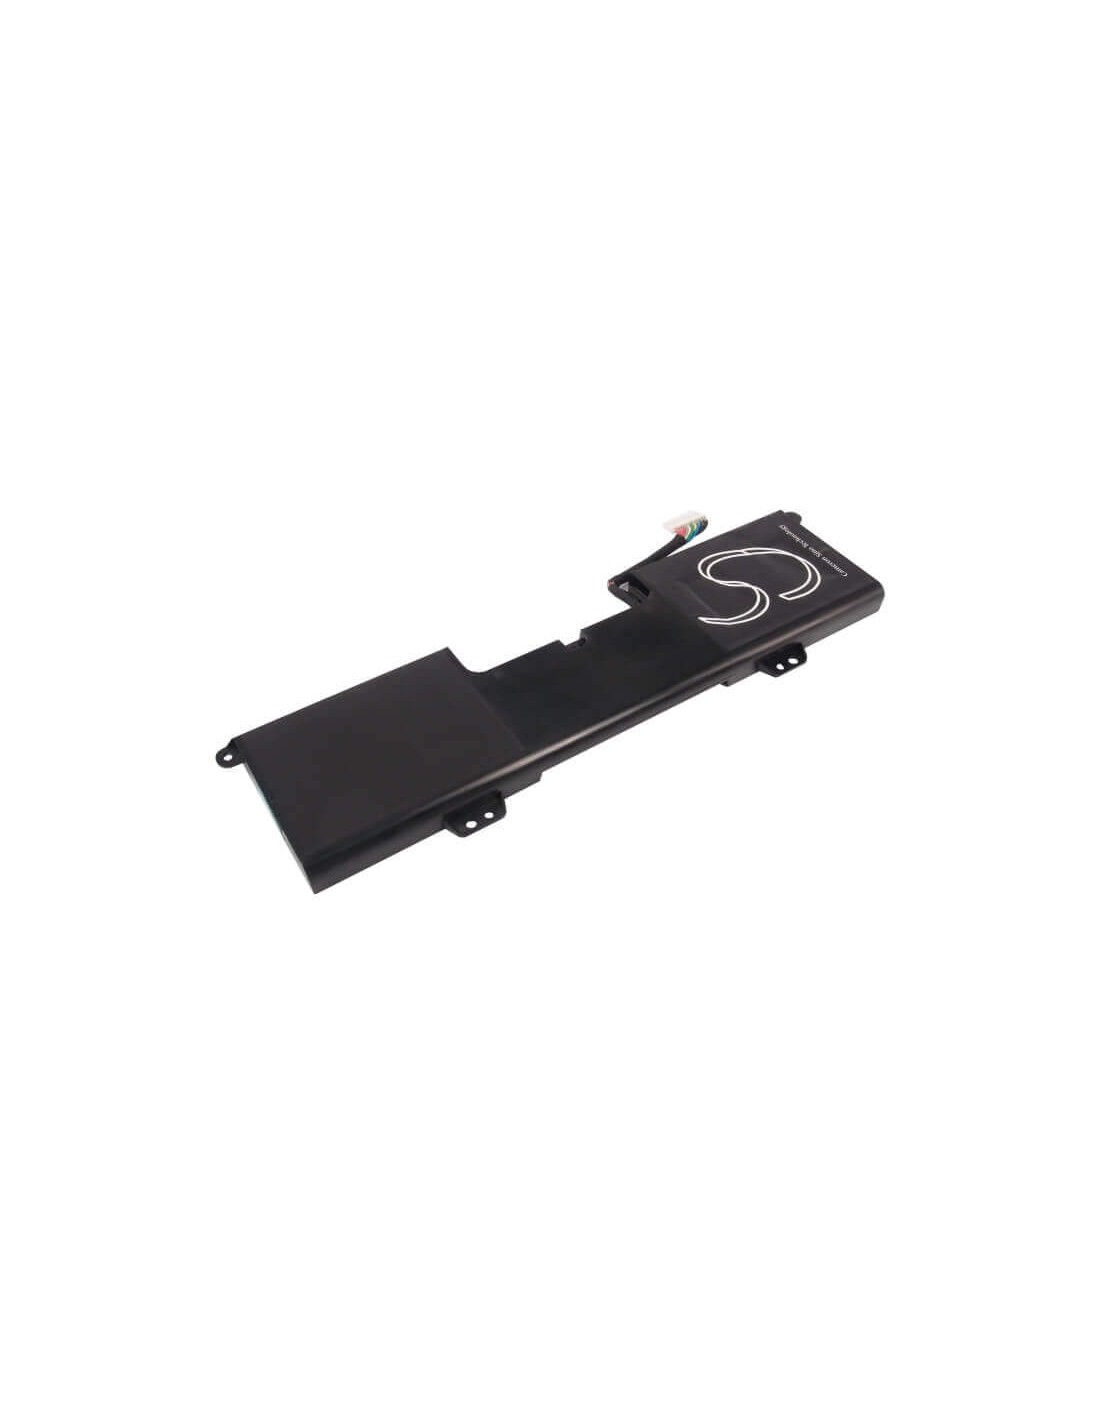 Black Battery for Dell Inspiron Duo 1090, Inspiron Duo Convertible 14.8V, 1950mAh - 28.86Wh